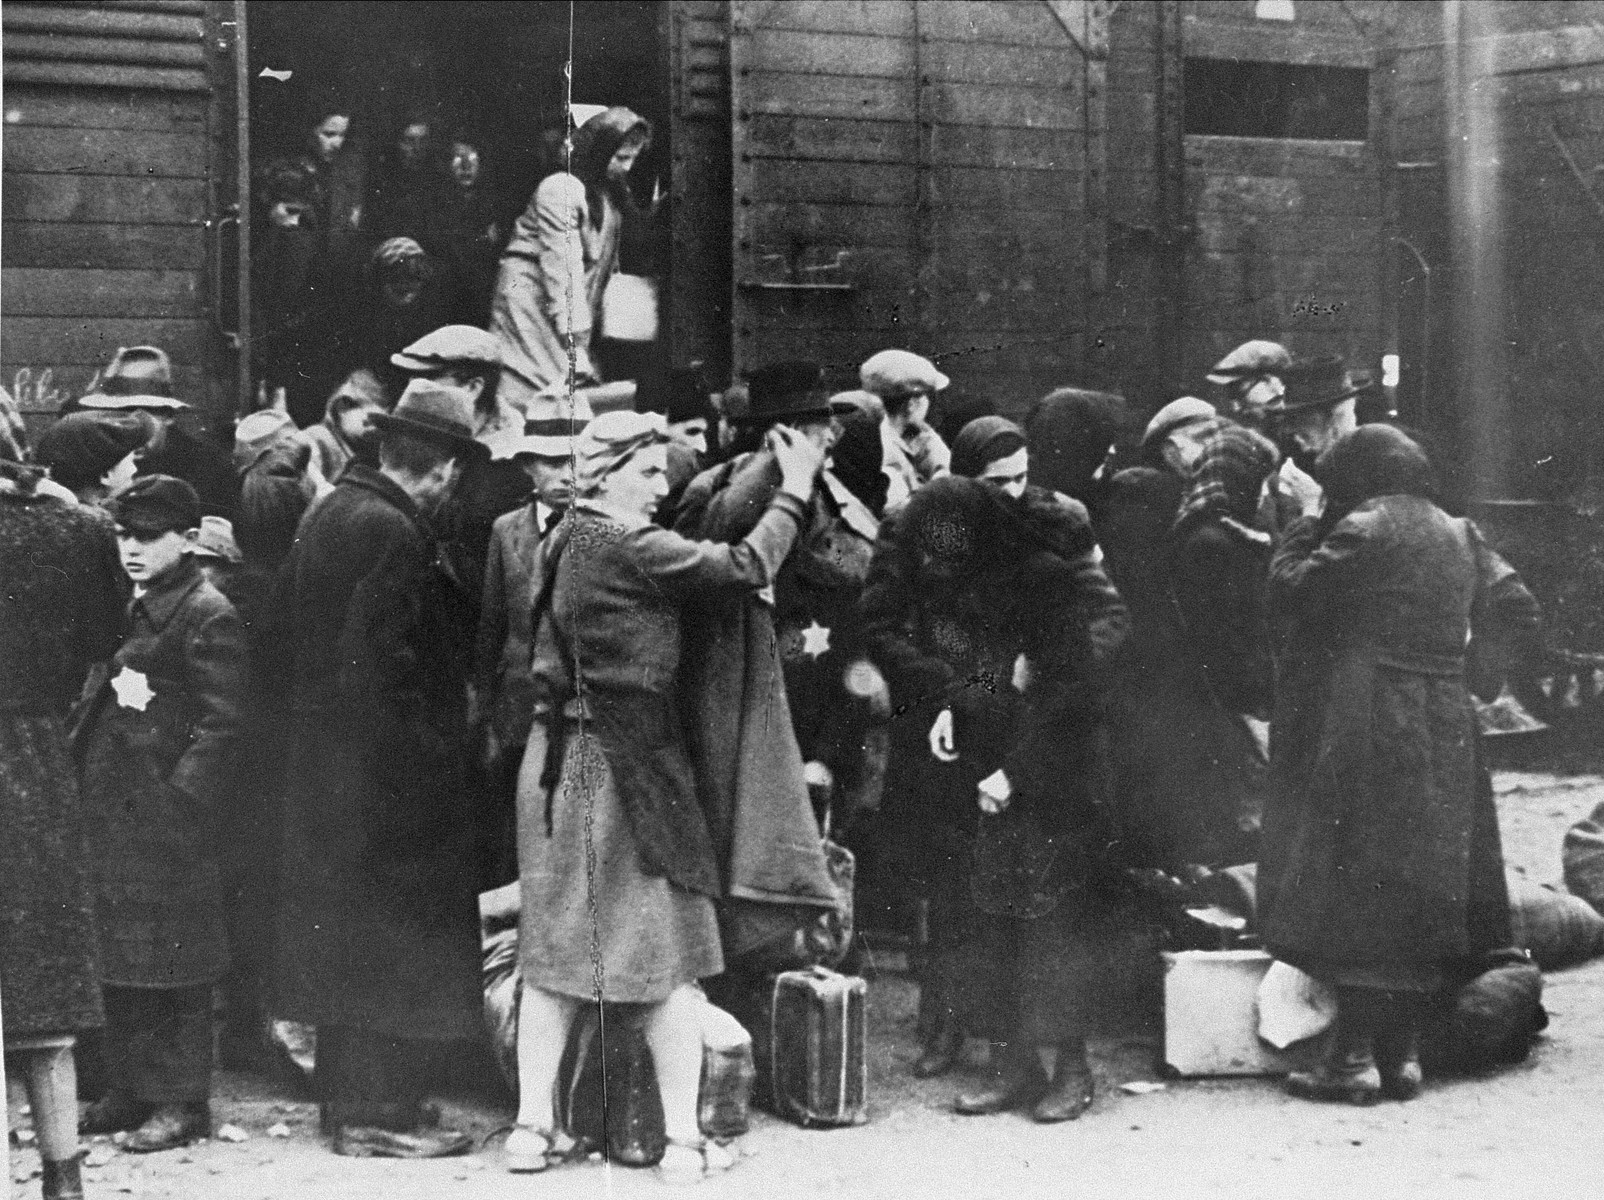 A transport of Jews from Subcarpathian Rus is taken off the trains and assembled on the ramp at Auschwitz-Birkenau.